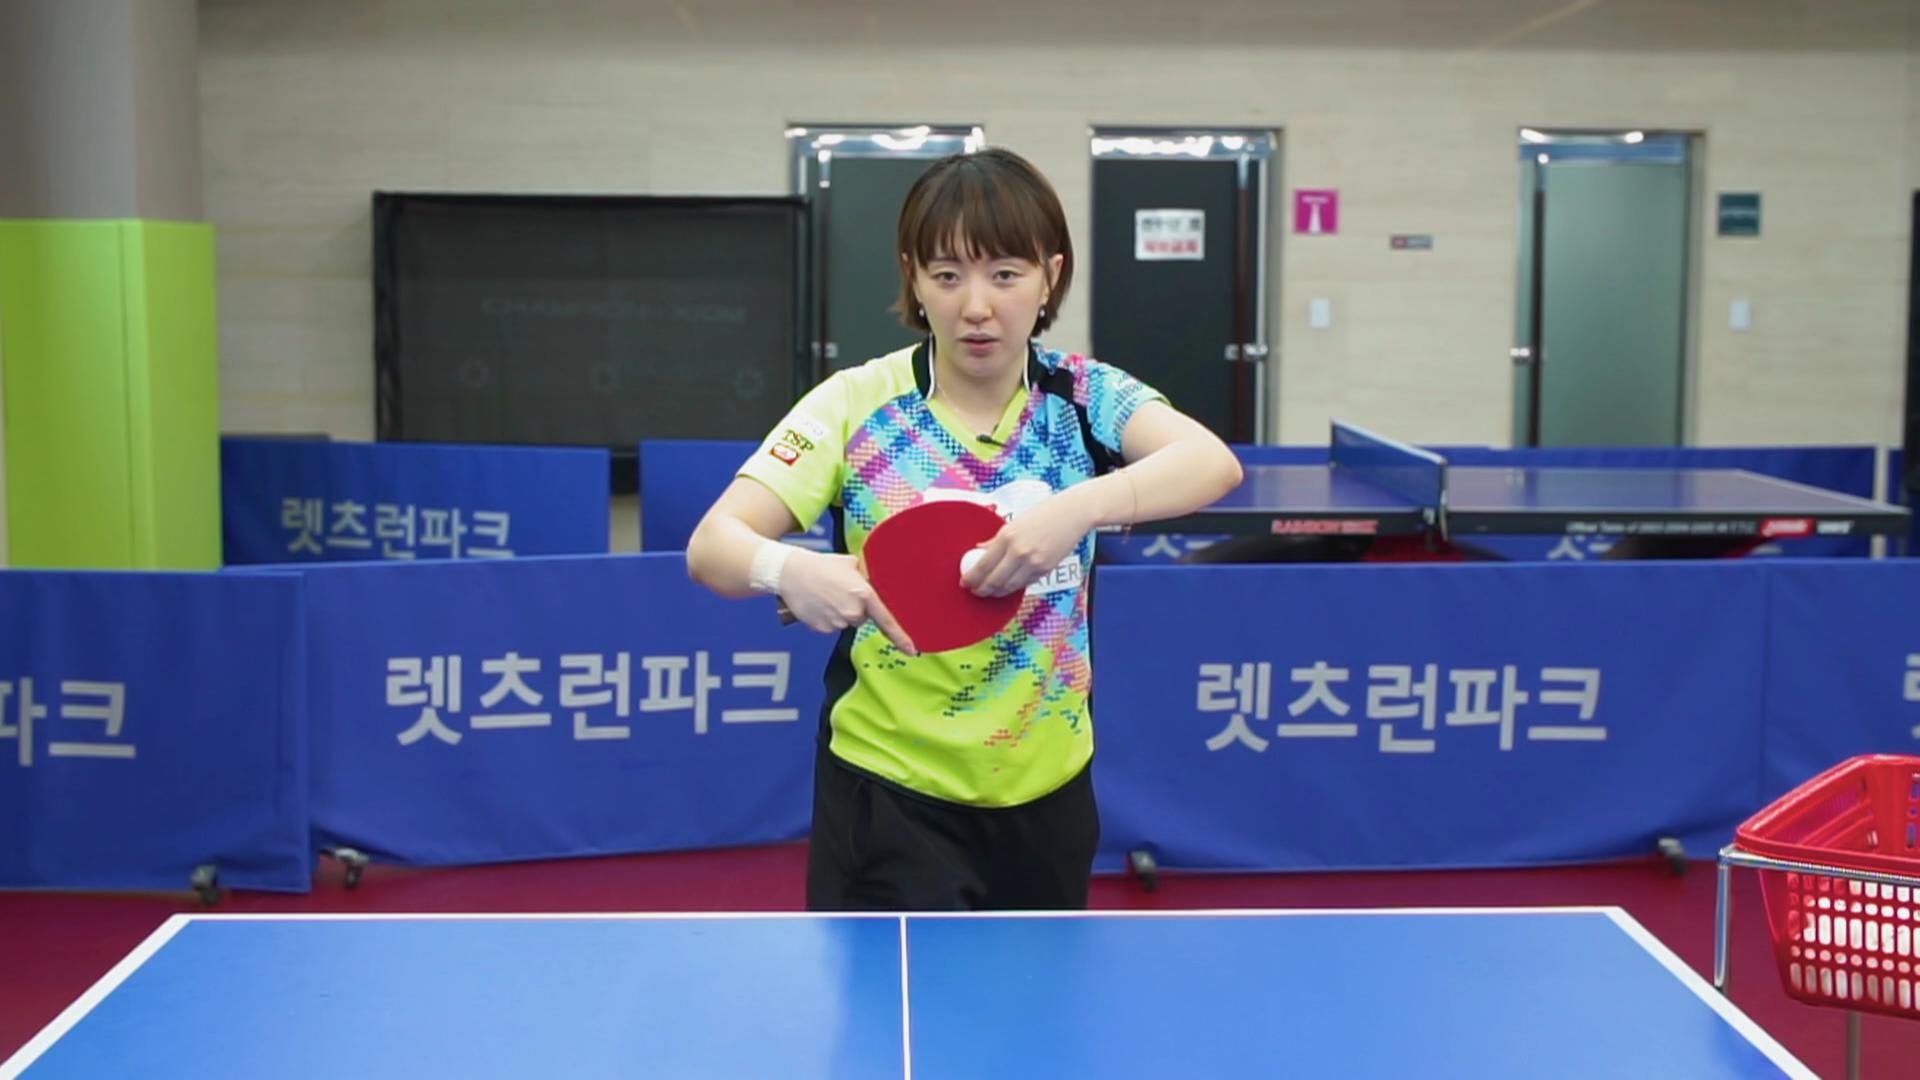 Table tennis rules Everything you need to know